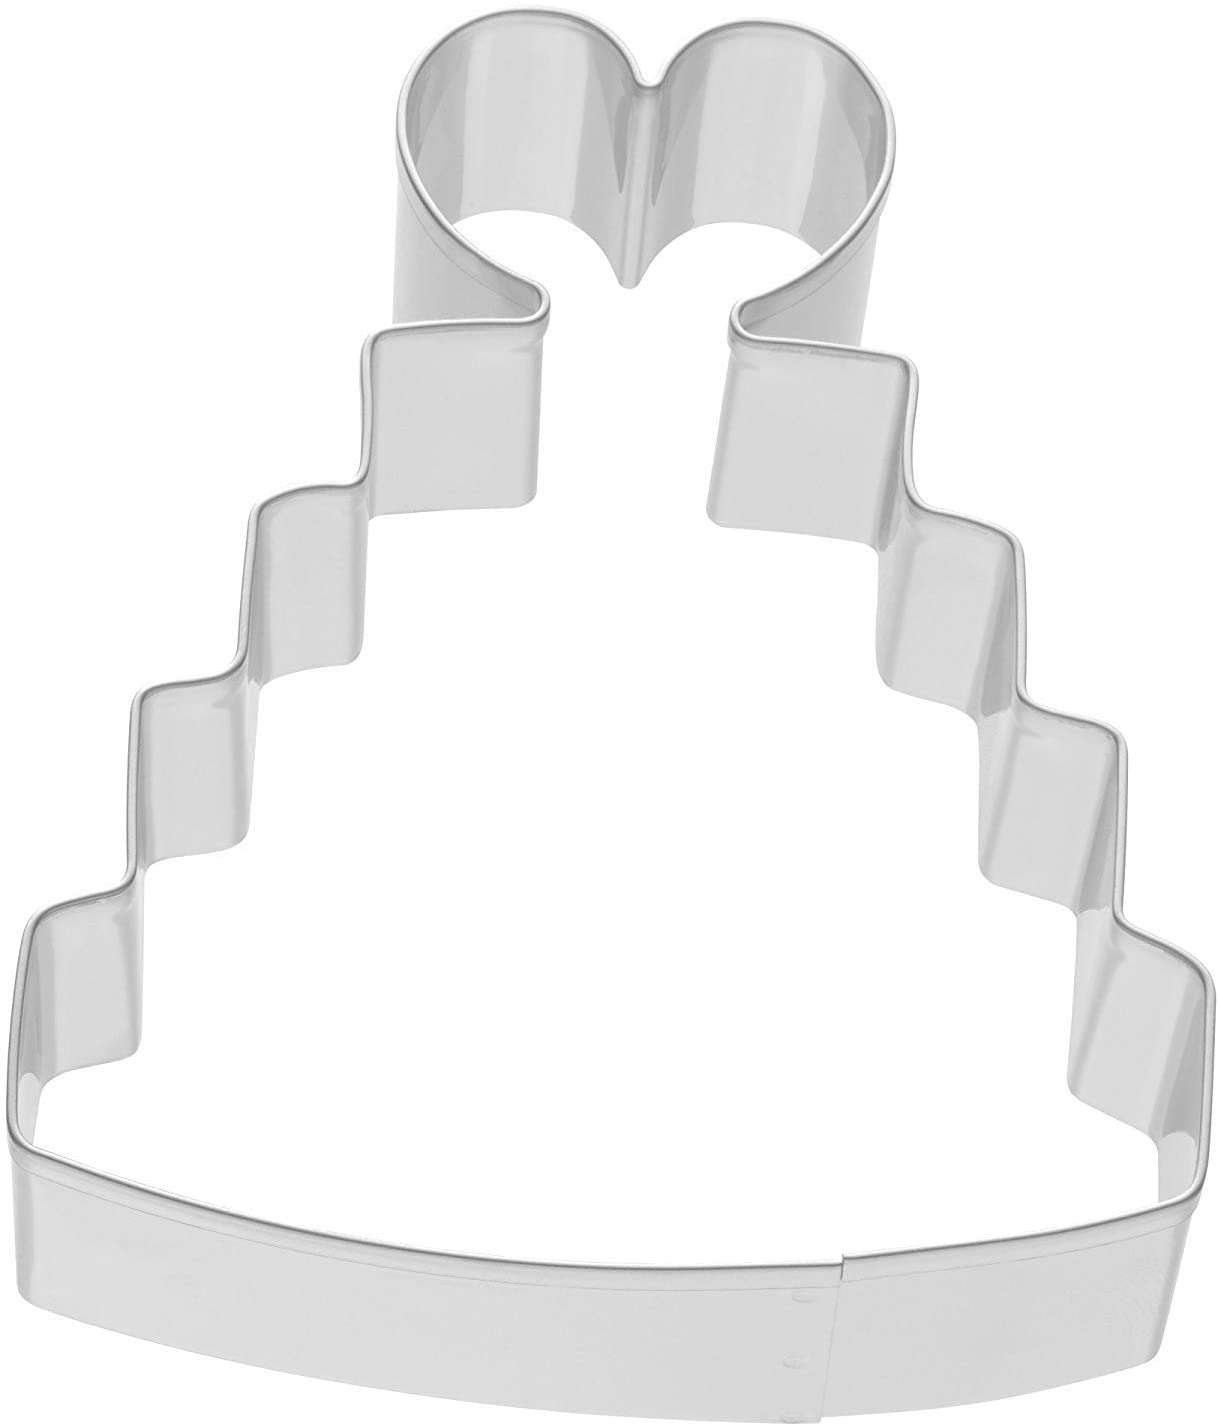 Kaiser Cookie Cutter Wedding Cake Stainless Steel Cookie Cutter for Biscuits, 7 x 8 x 2.5 cm